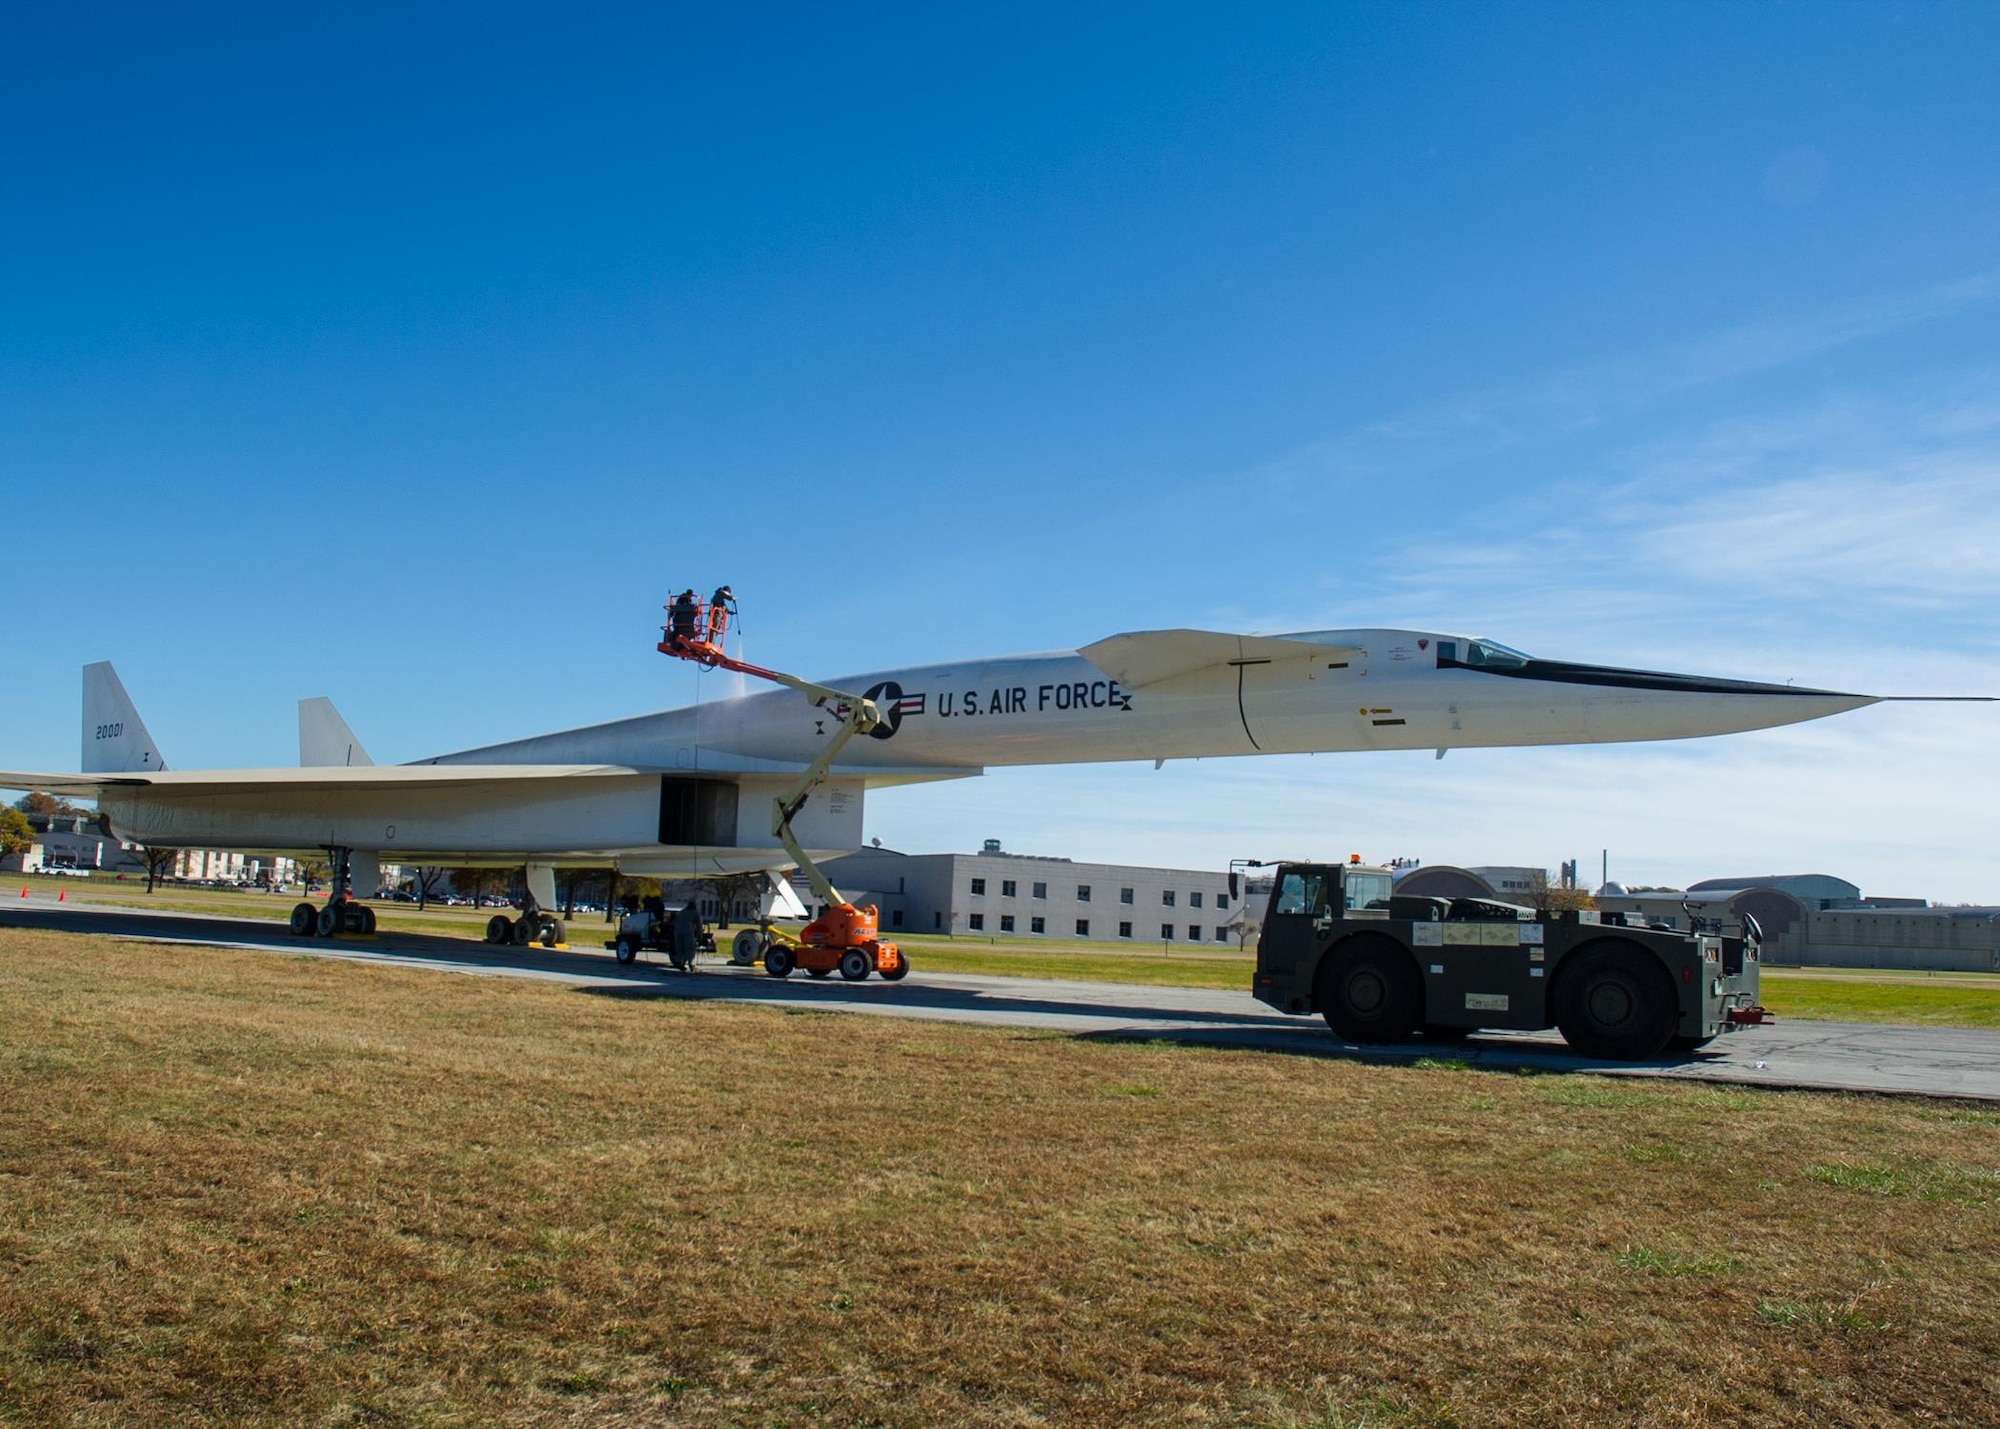 Restoration crews wash the North American XB-70 Valkyrie prior to its move to the new fourth building at the National Museum of the U.S. Air Force on Oct. 26, 2015. (U.S. Air Force photo by Ken LaRock)